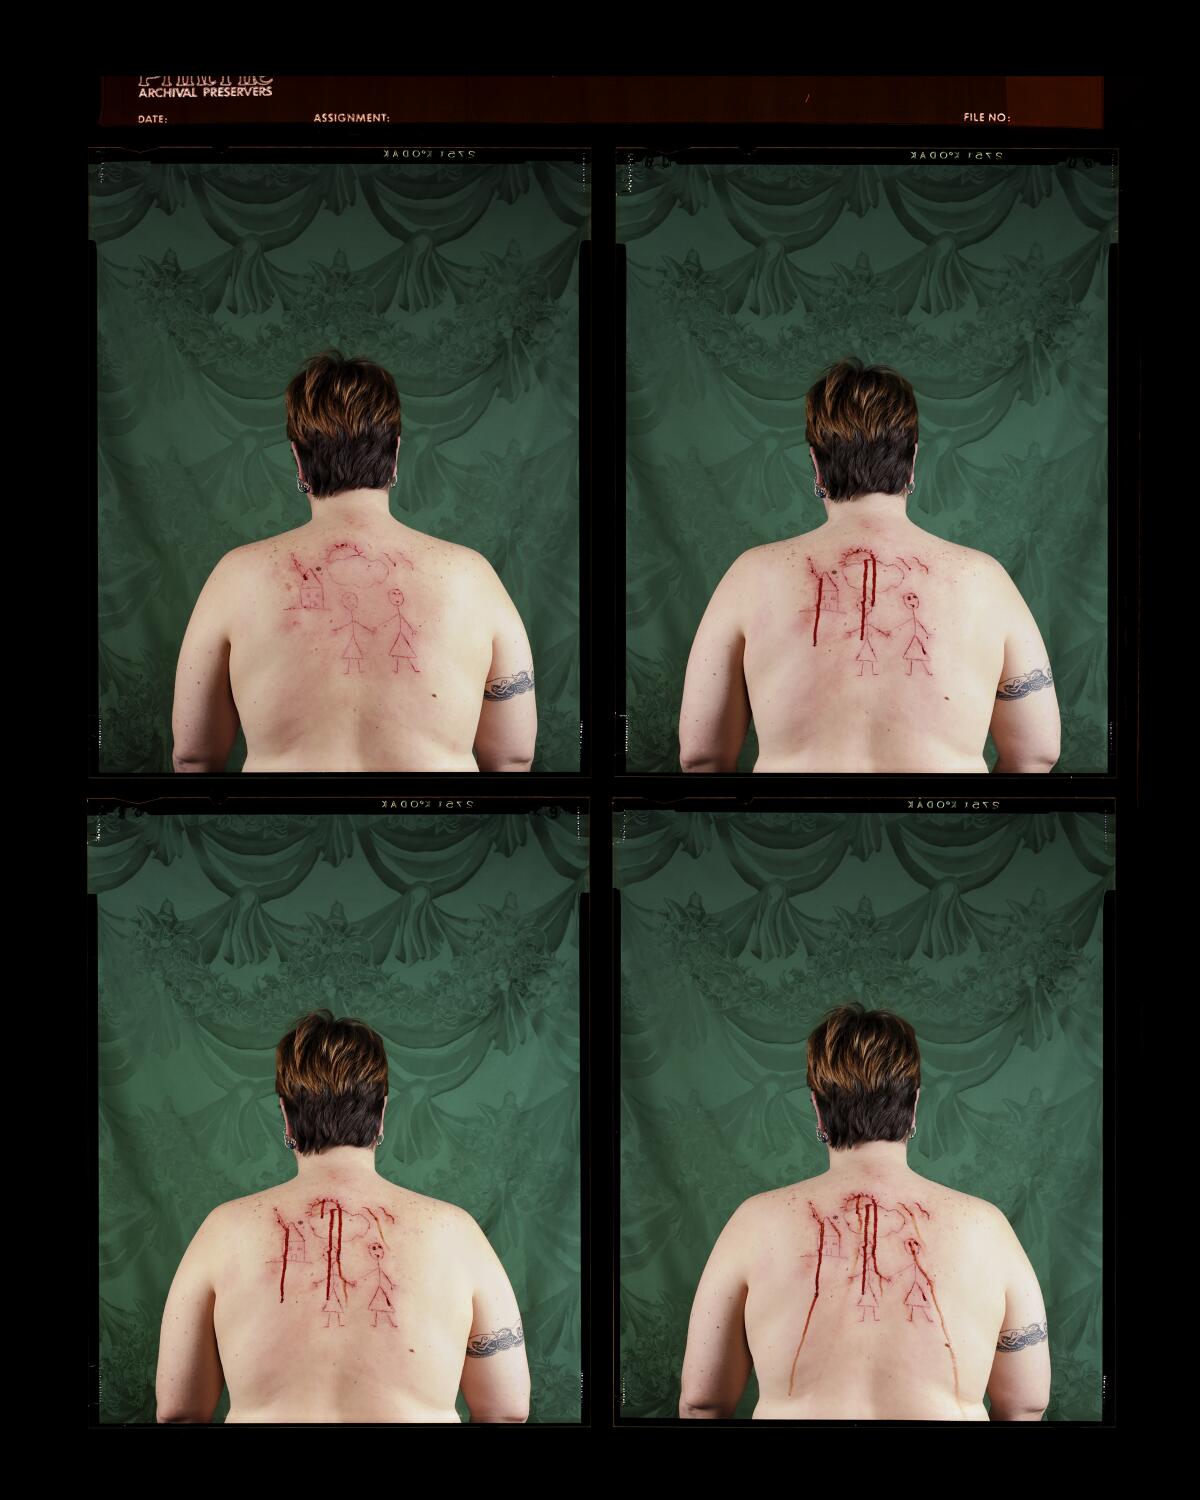 Four stacked images show blood running down a woman's bare back in order of increasing bloodiness. 